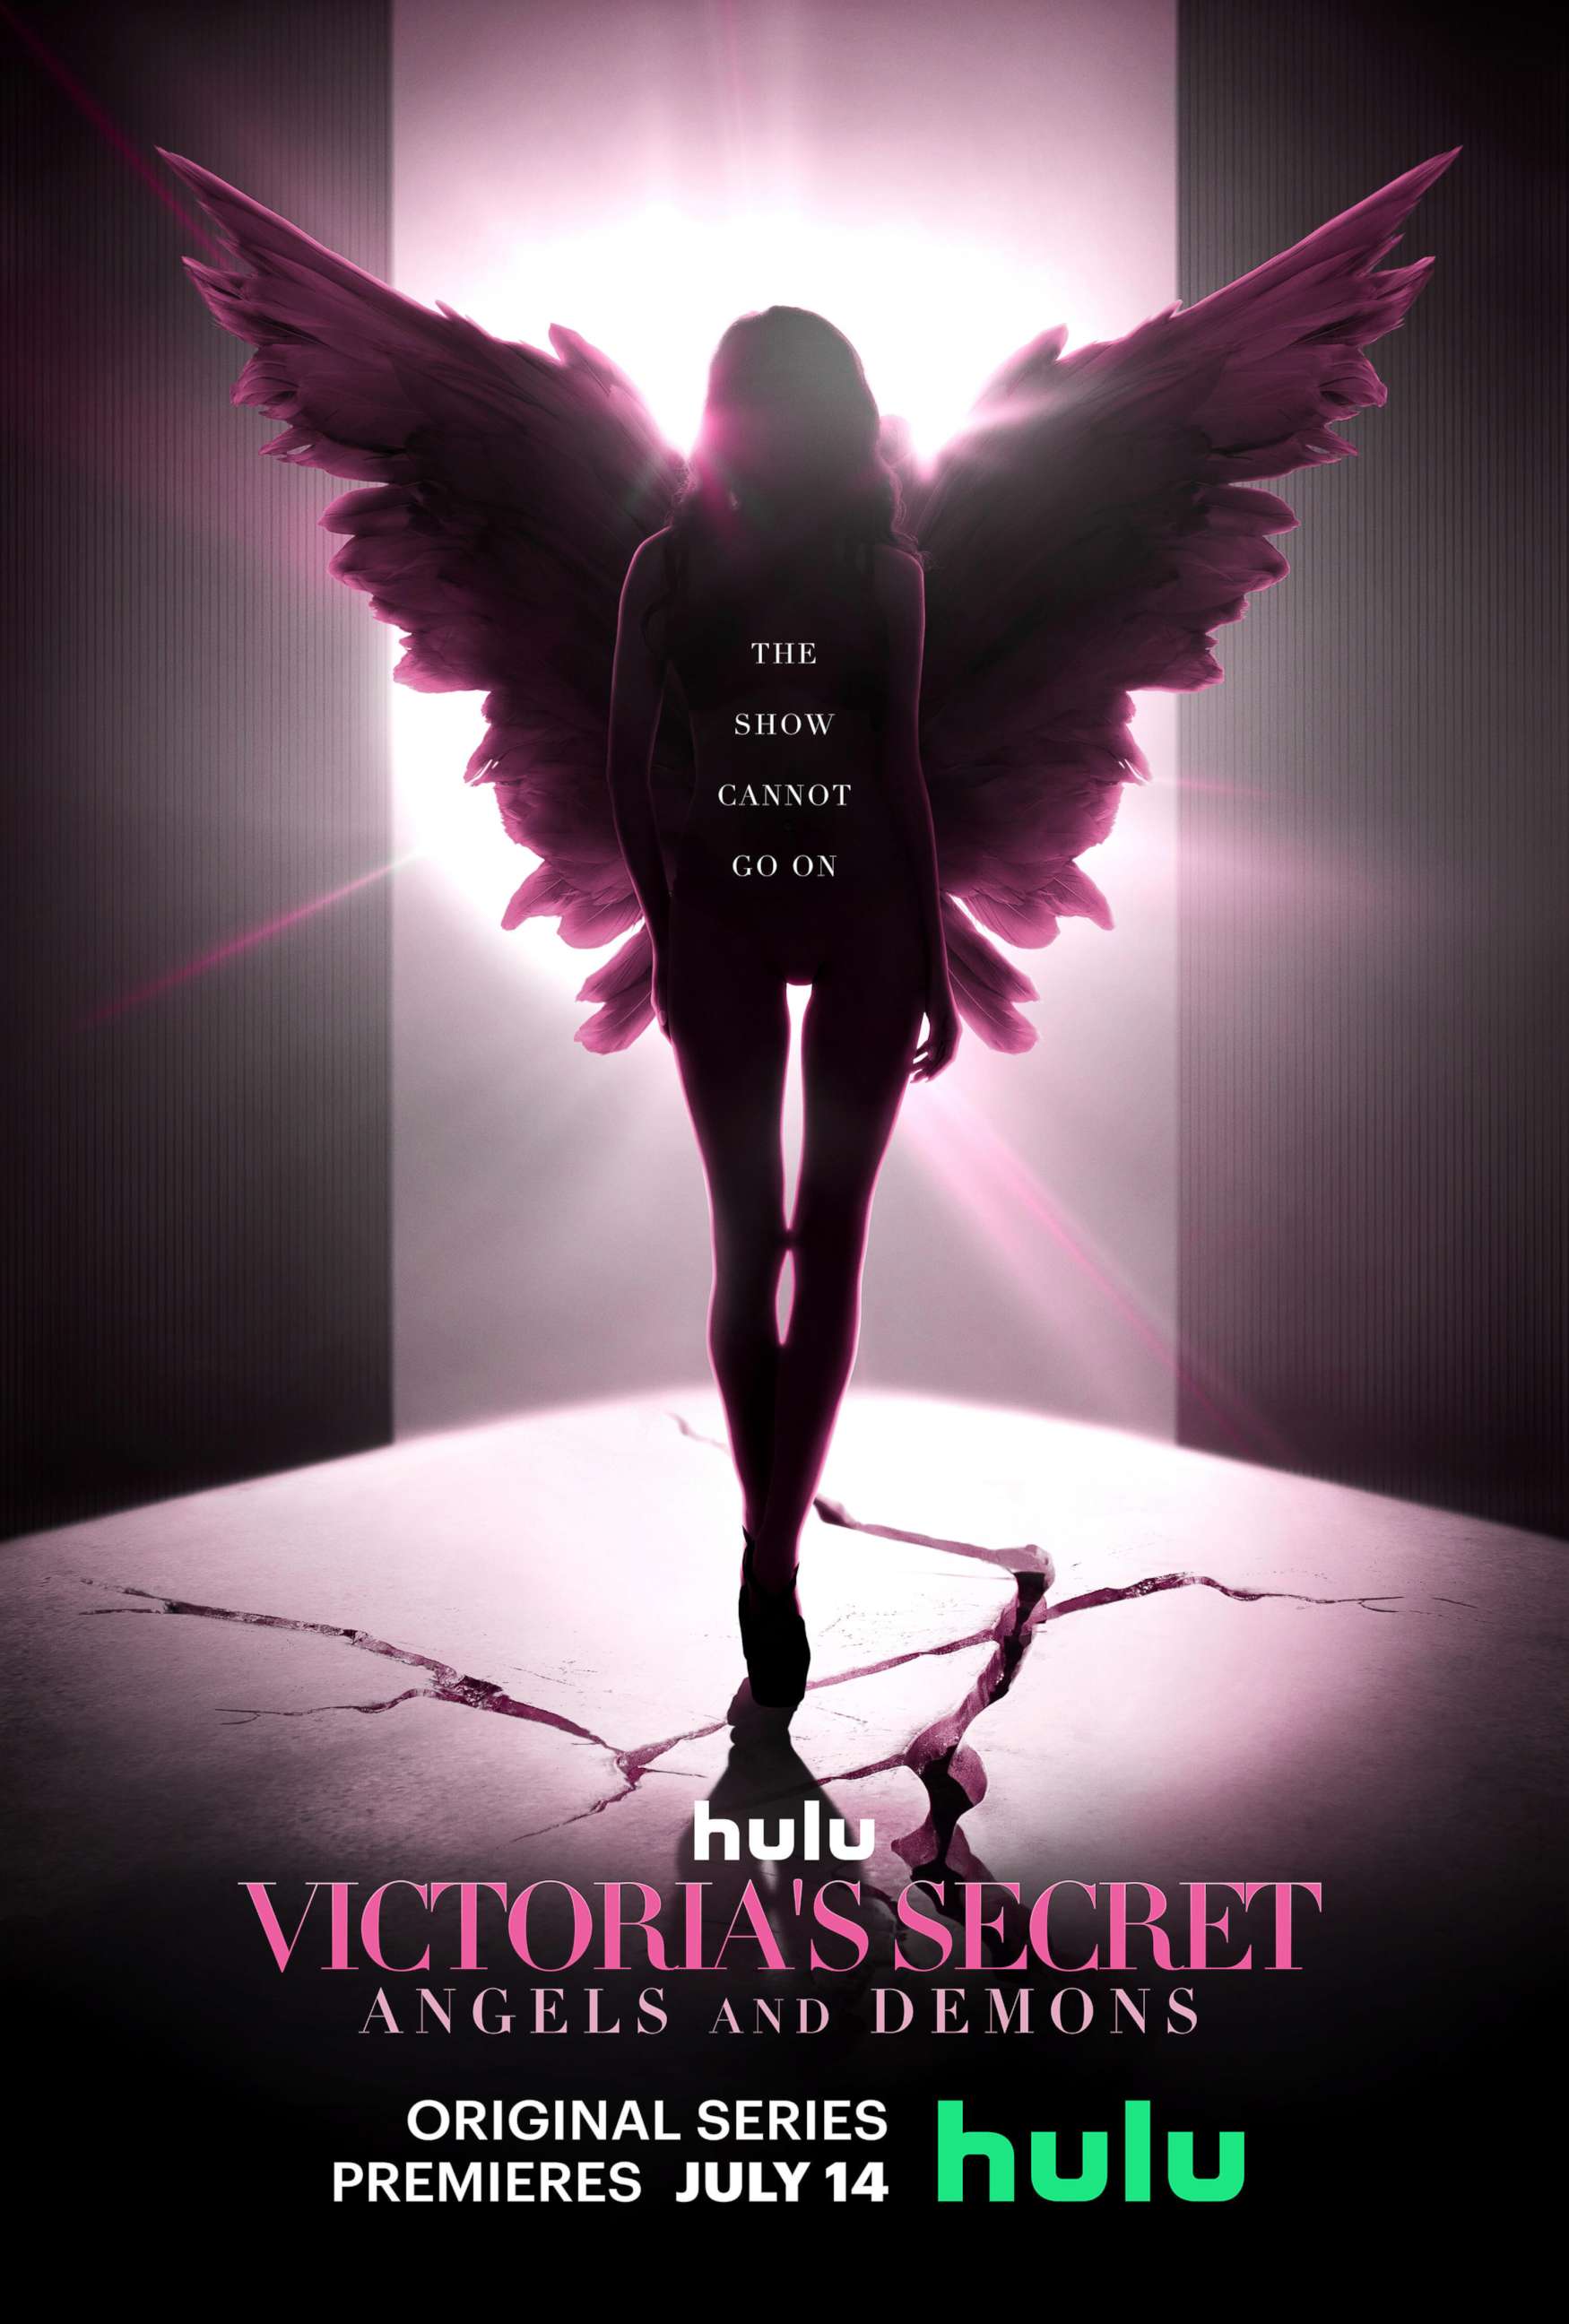 PHOTO: Victoria's Secret: Angels and Demons tells the searing and provocative story of the Victoria's Secret brand and its longtime CEO, the larger-than-life, enigmatic billionaire Les Wexner.